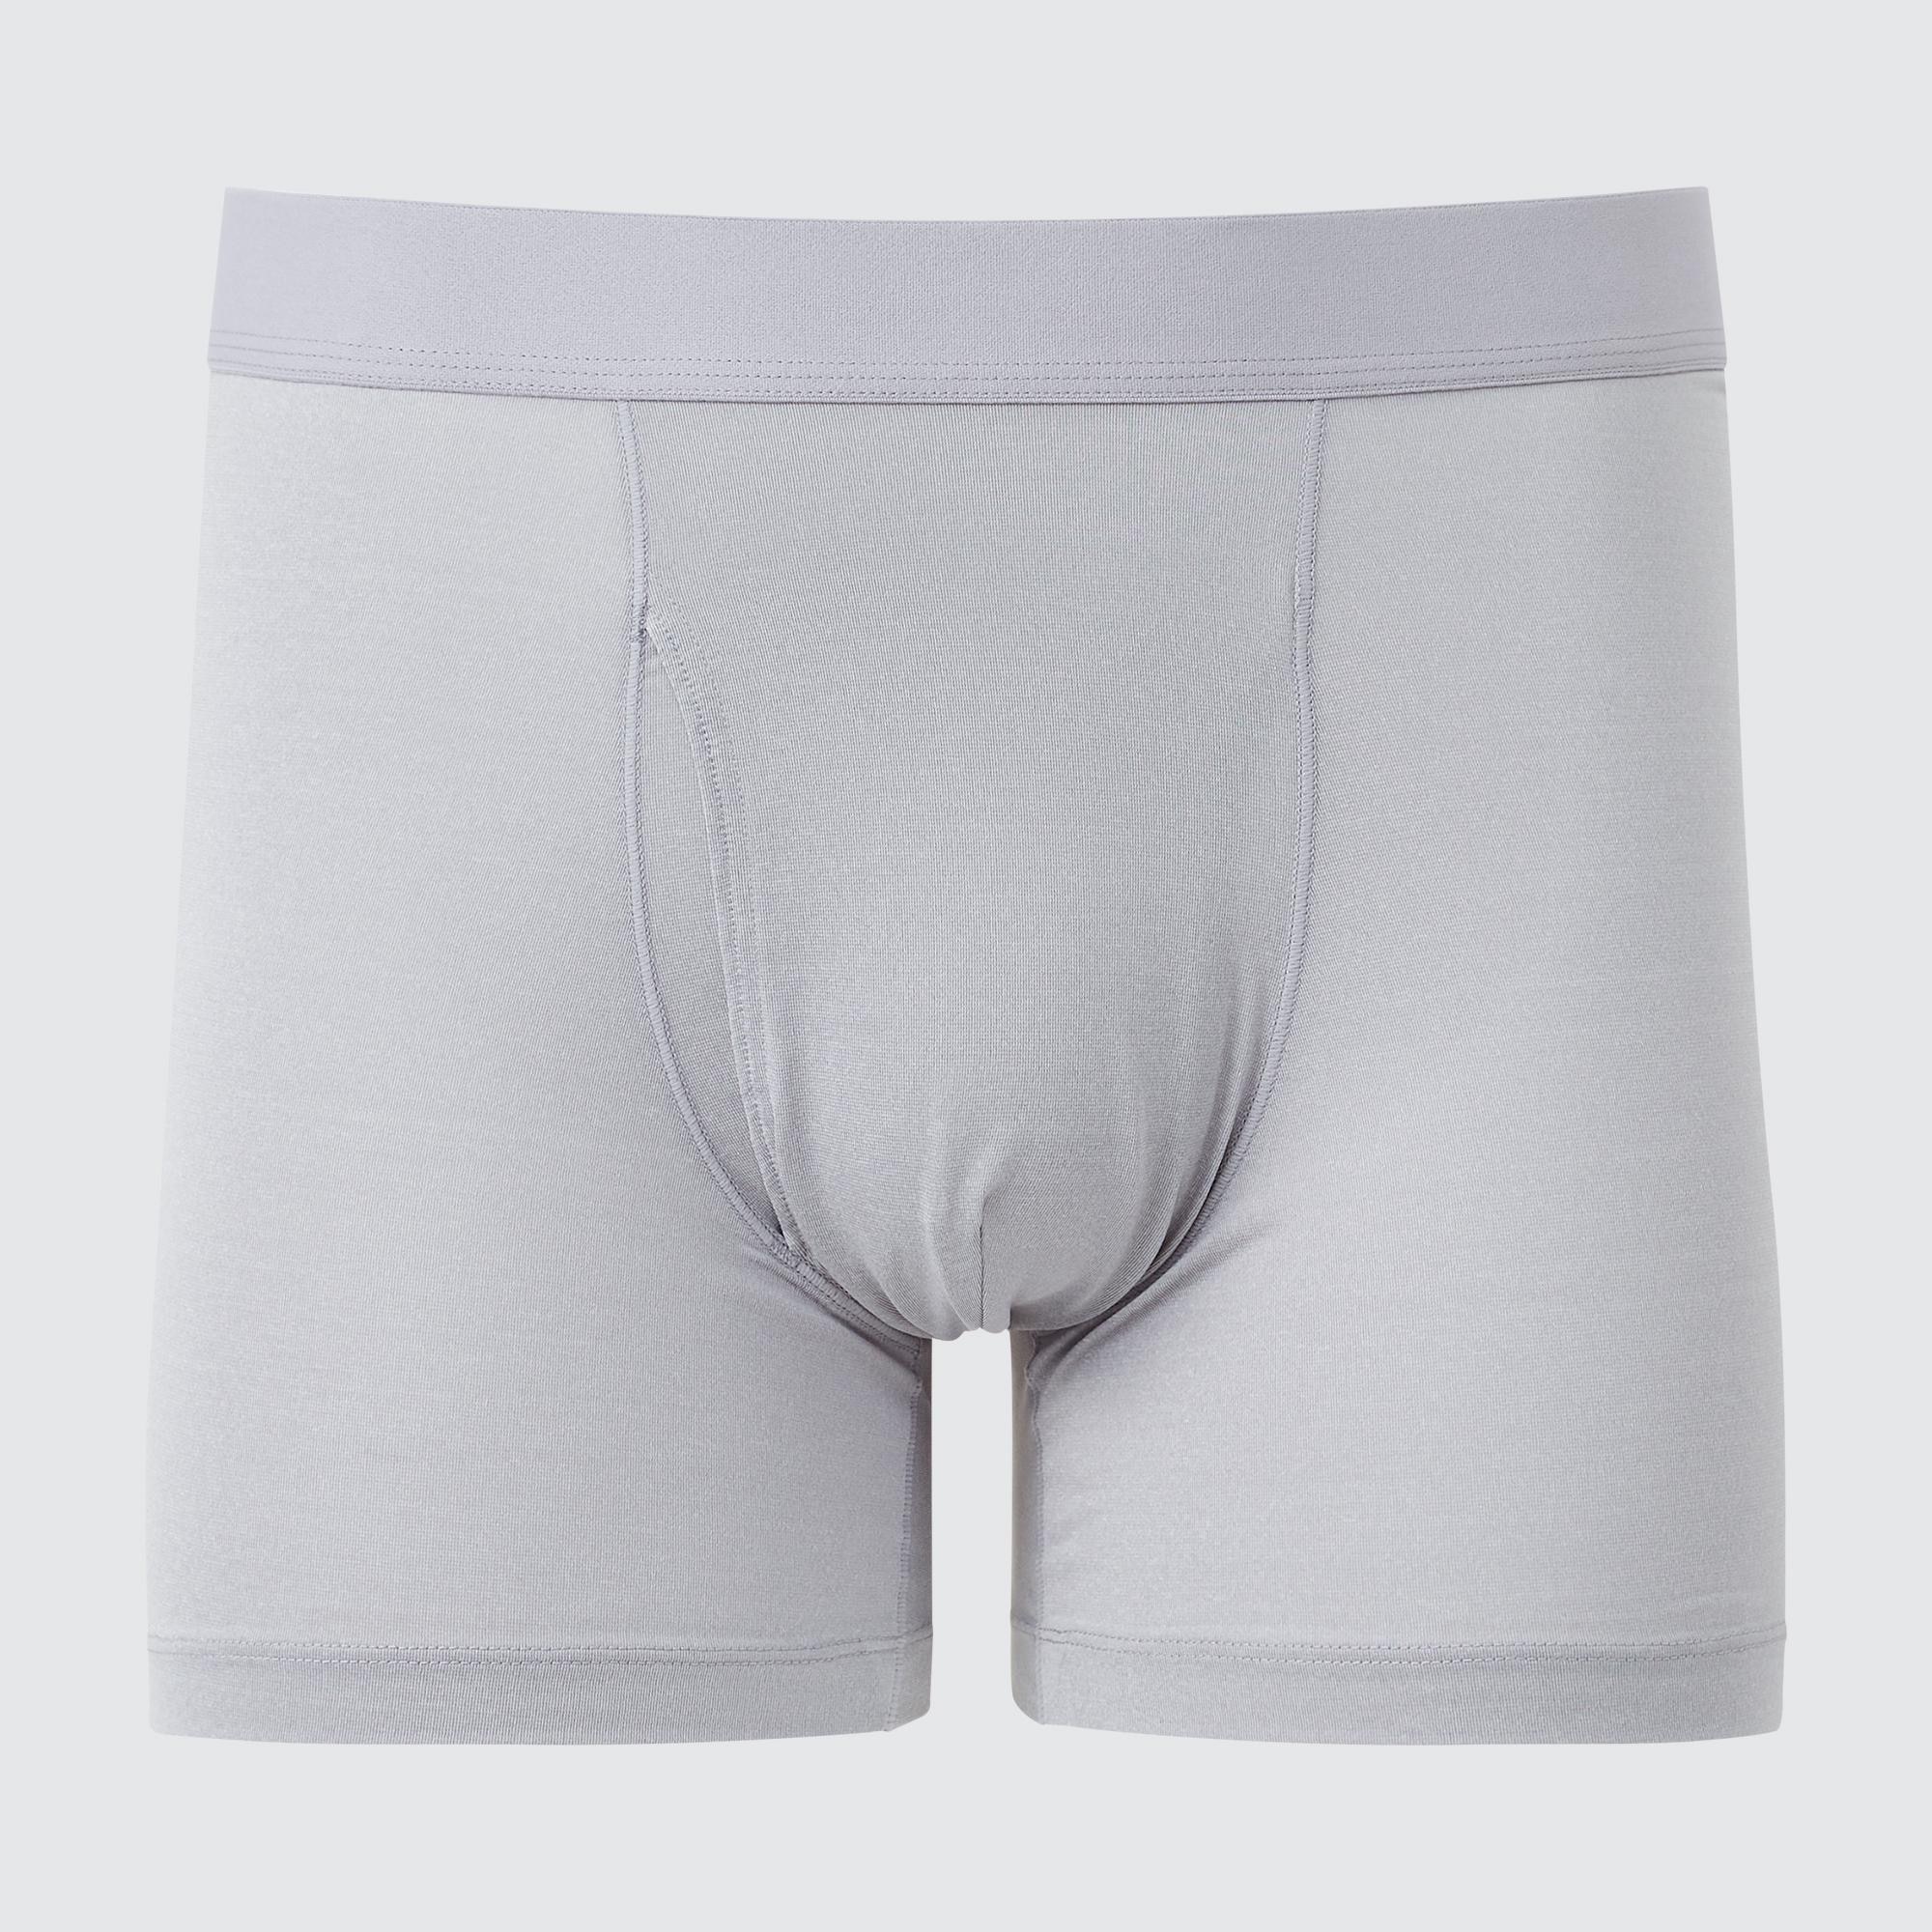 UNIQLO on X: Breathable and comfortable, our #AIRism Boxer Briefs are your  go-to layer for any day of the week. #uniqlolifewear    / X